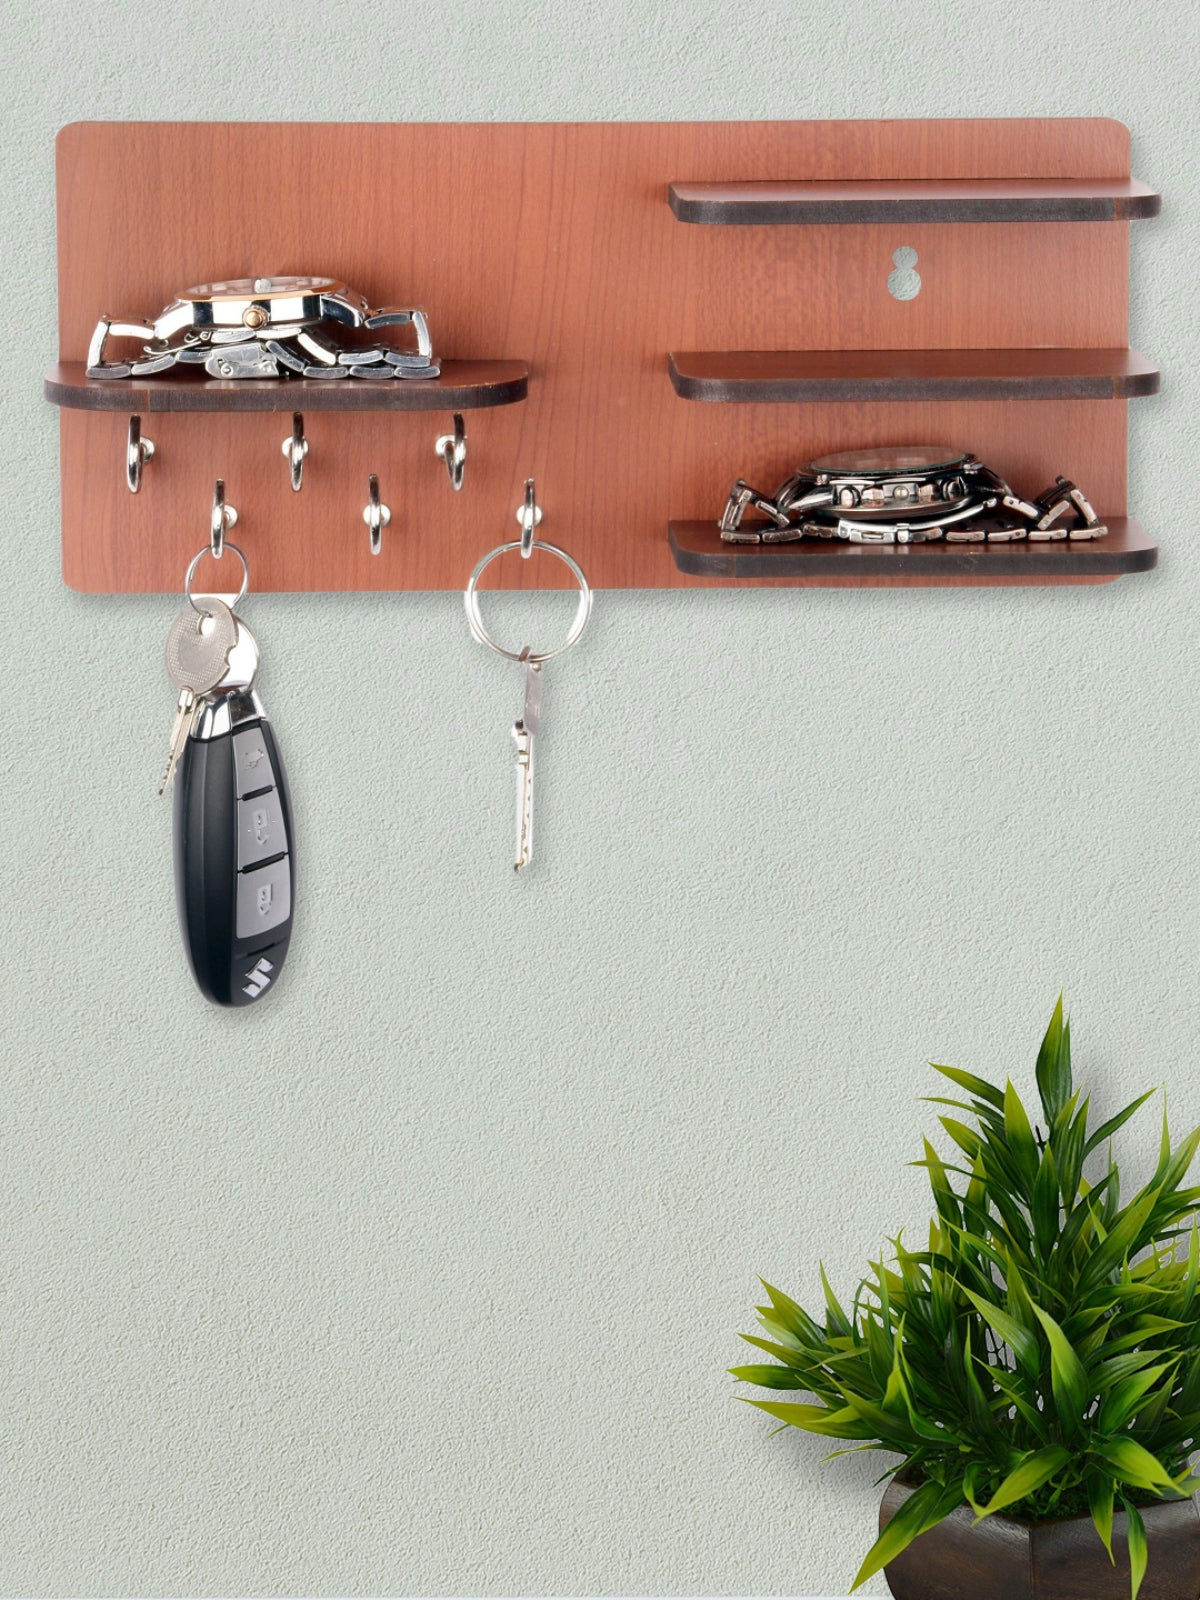 Wooden Key Holder With 4 Shelf For Home & Office Wall Decorative